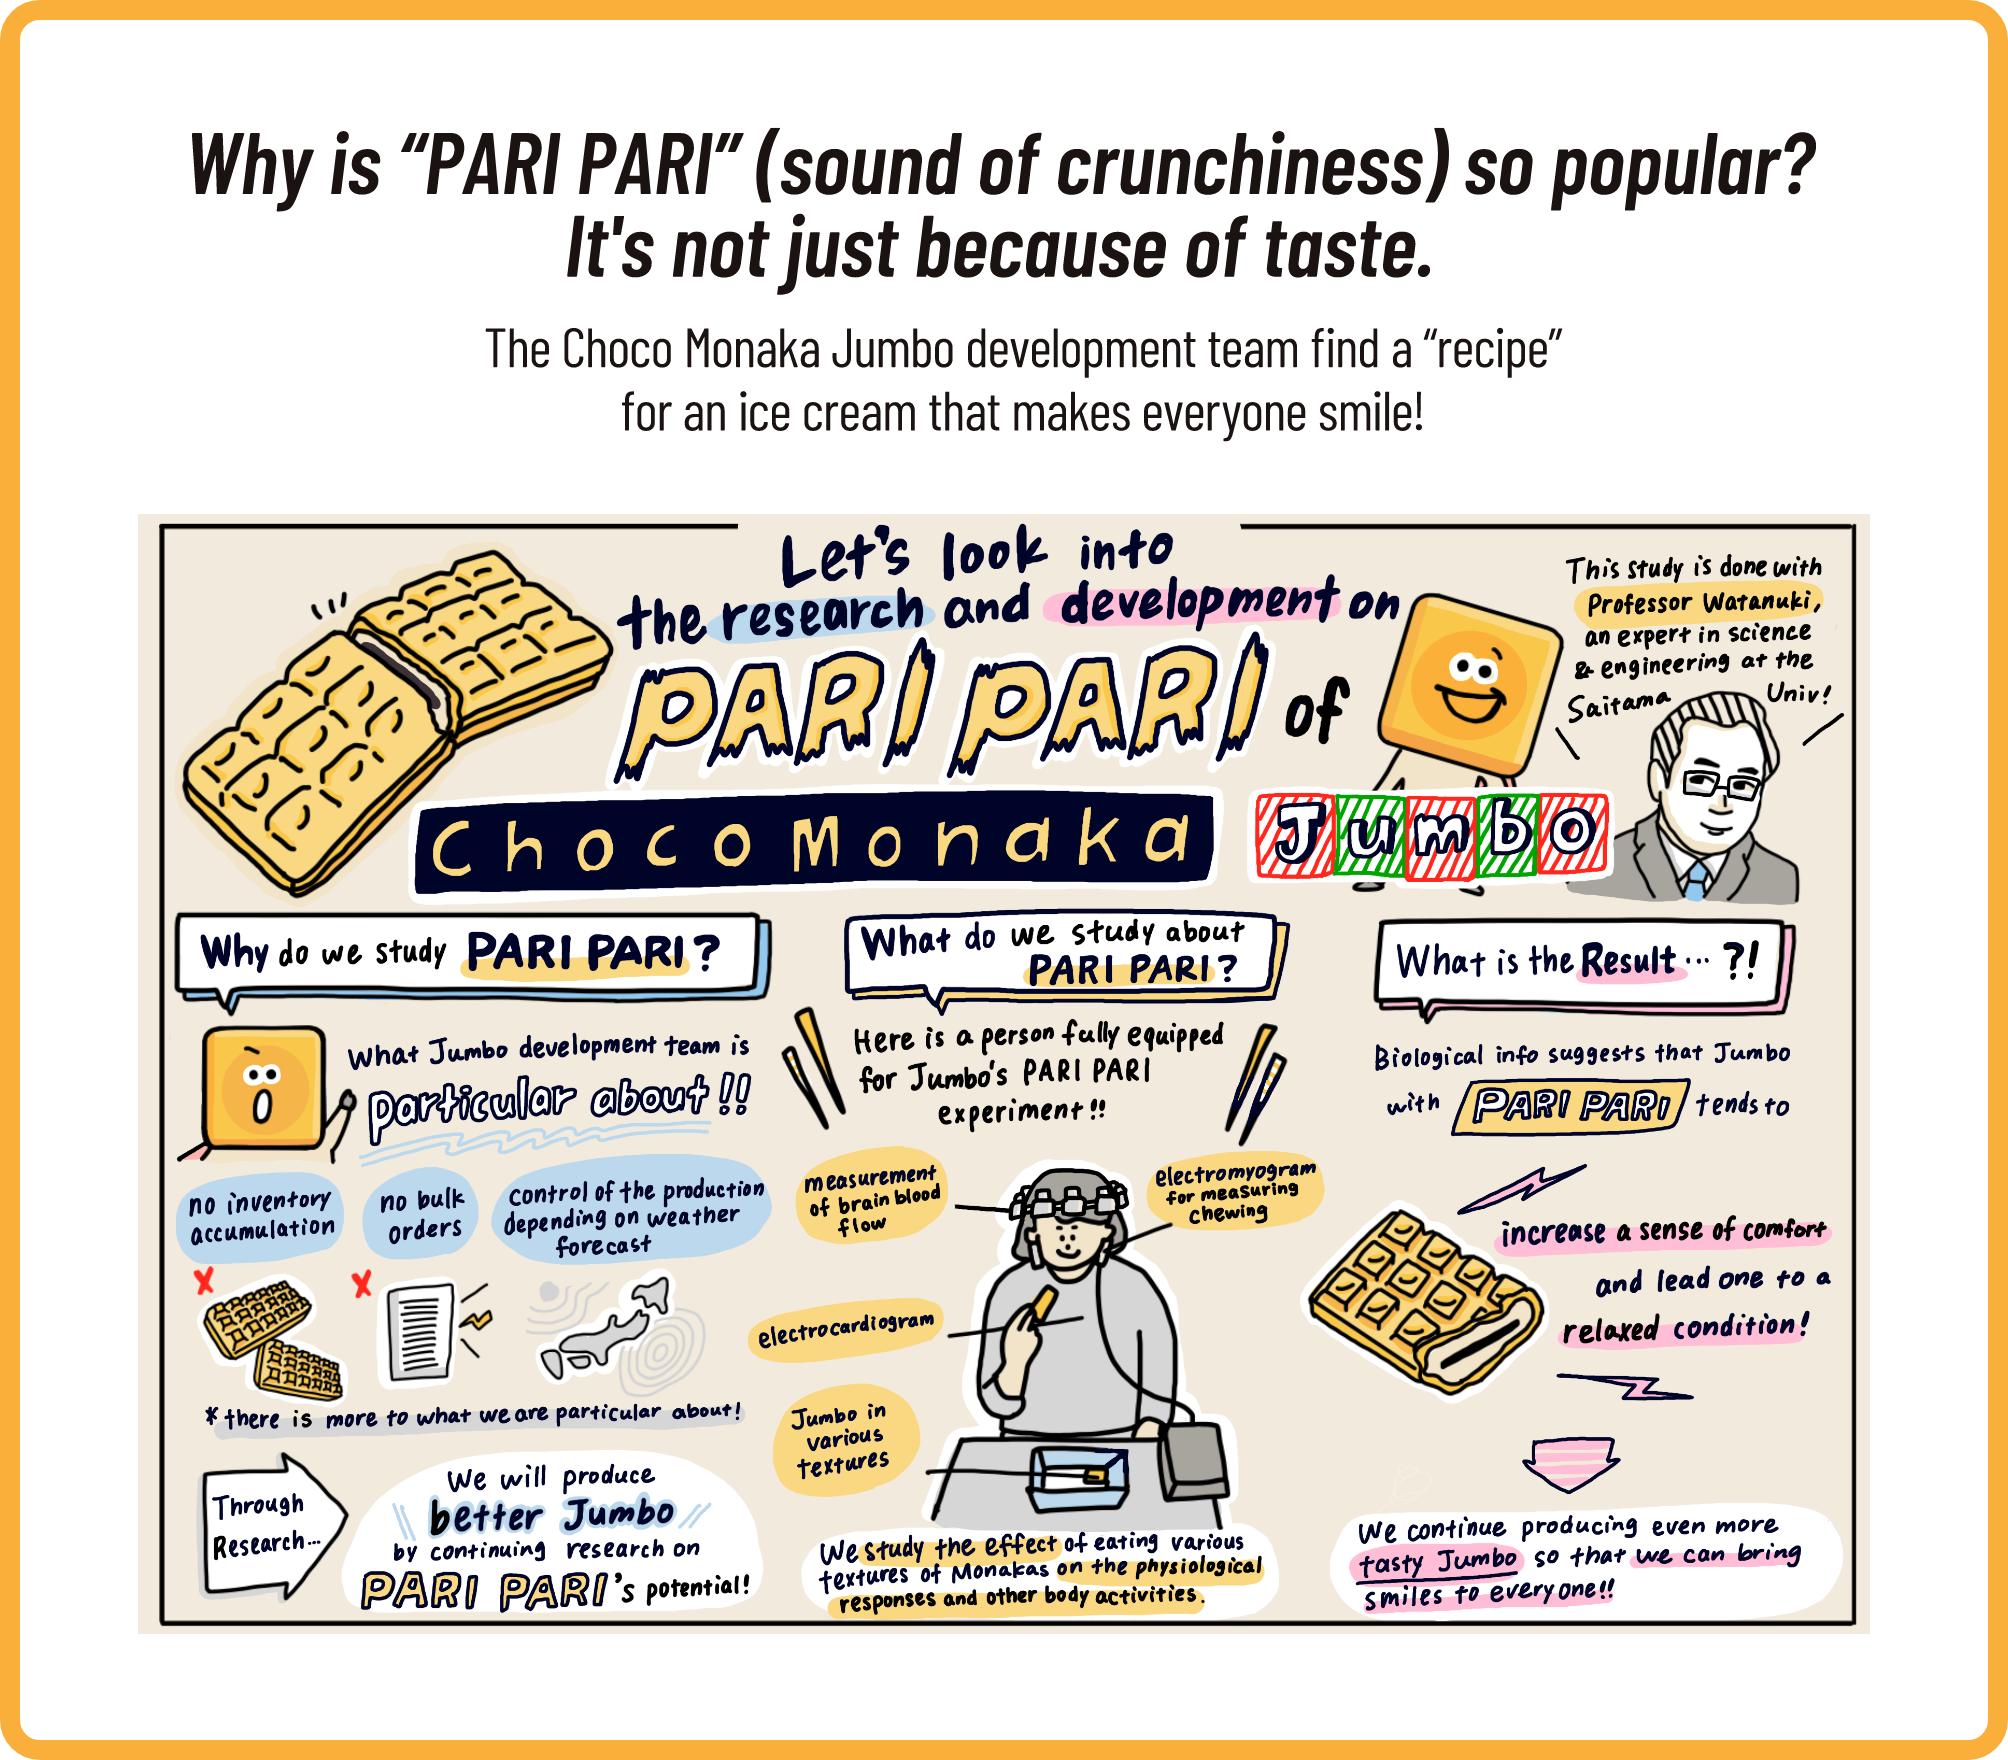 Why is “PARI PARI” (sound of crunchiness) so popular? It's not just because of taste. The Choco Monaka Jumbo development team find a “recipe” for an ice cream that makes everyone smile!